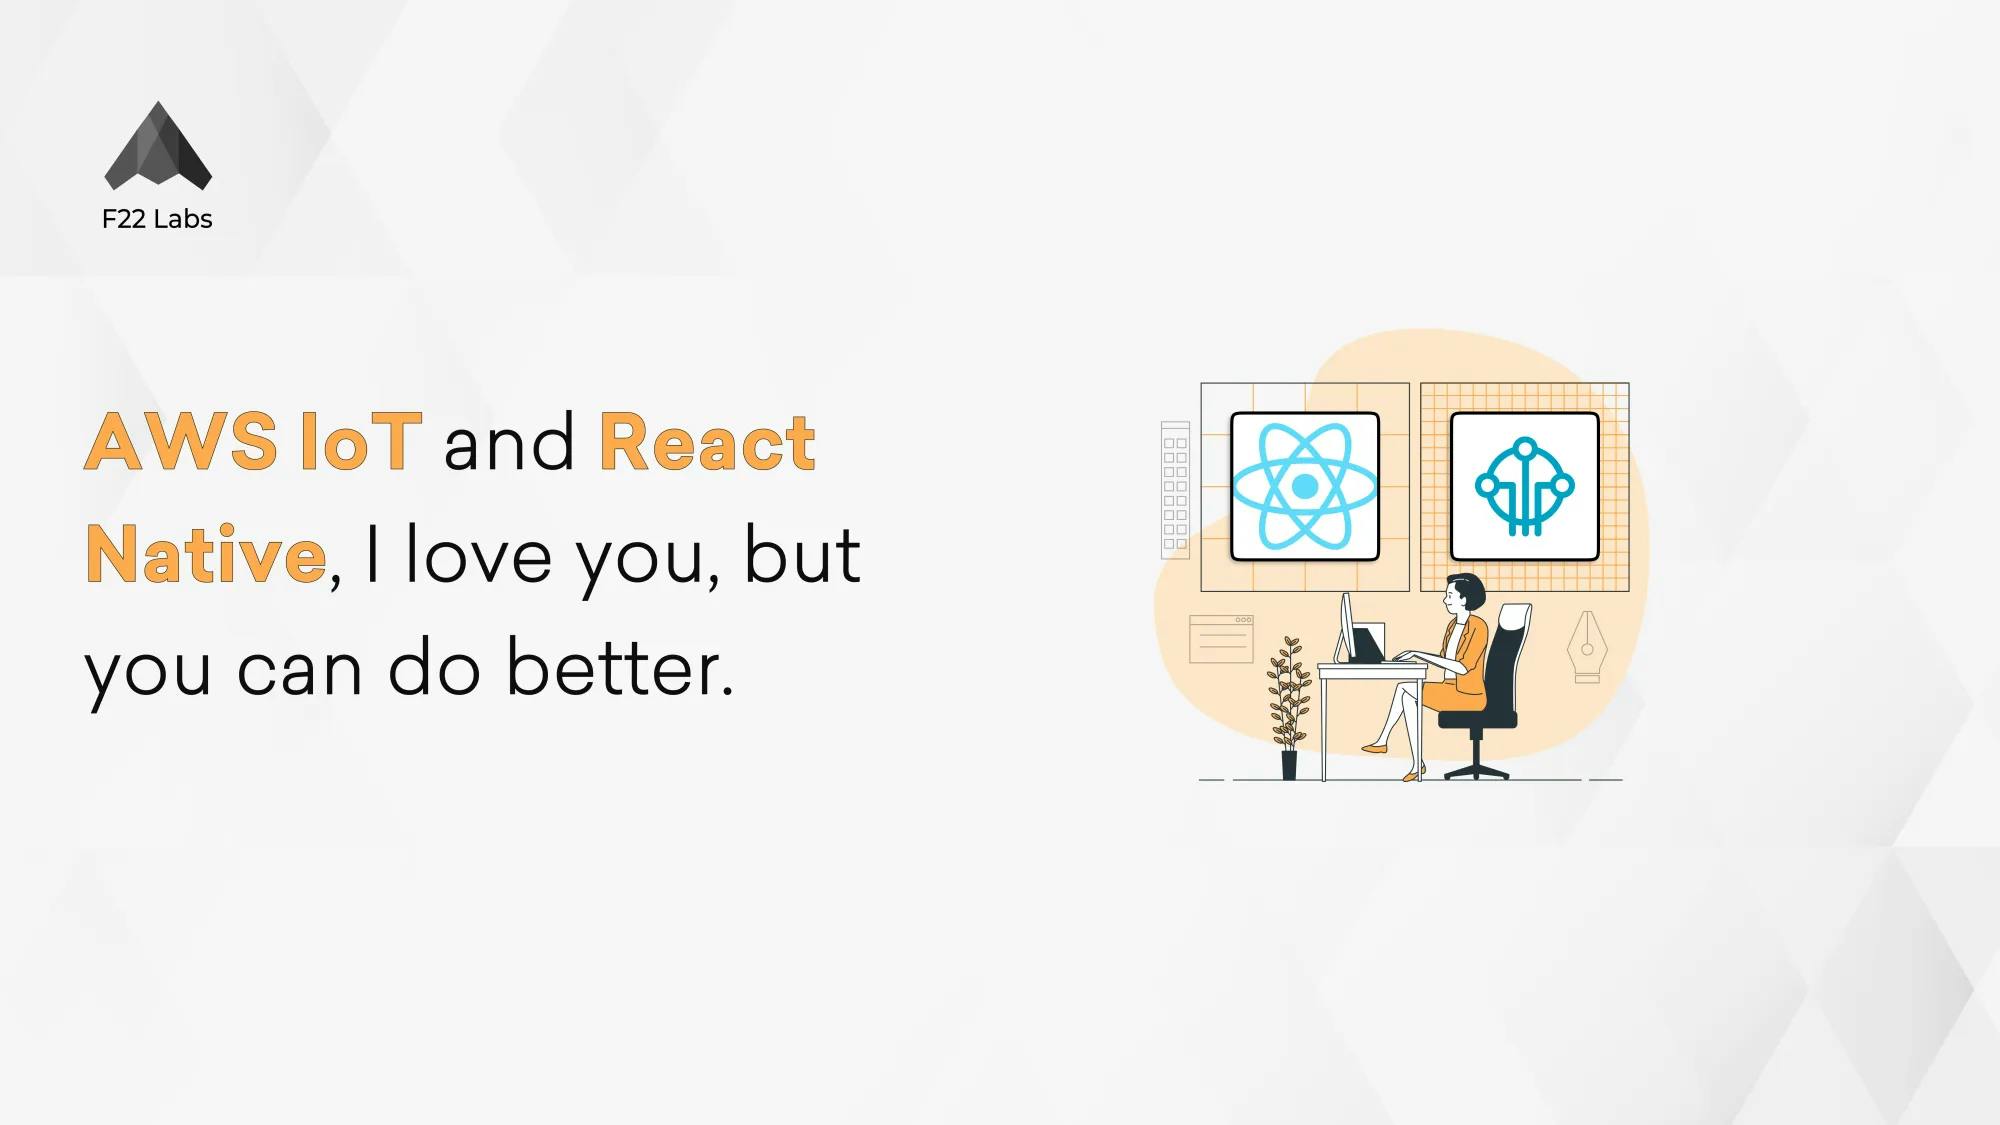 AWS IoT and React Native, I love you, but you can do better Hero